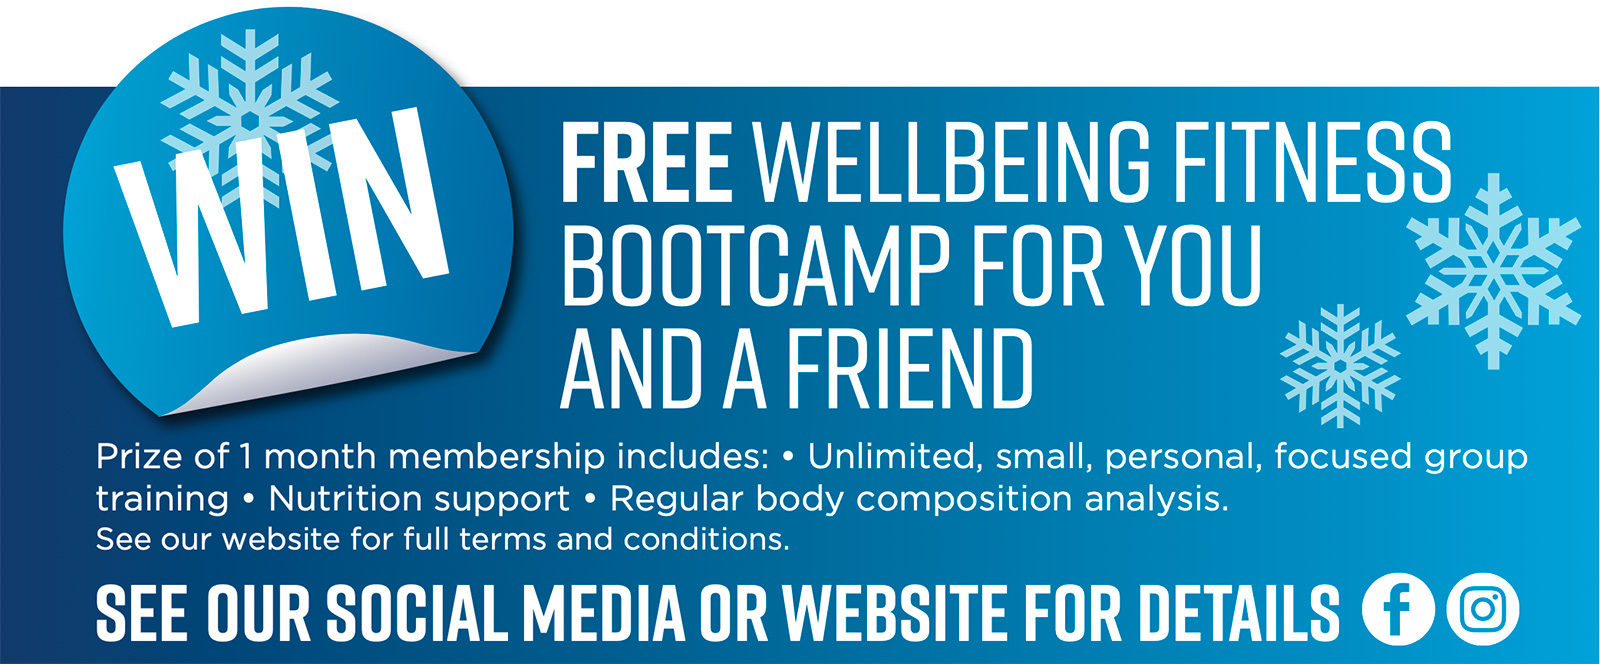 Free Wellbeing Fitness Bootcamp for you and a friend